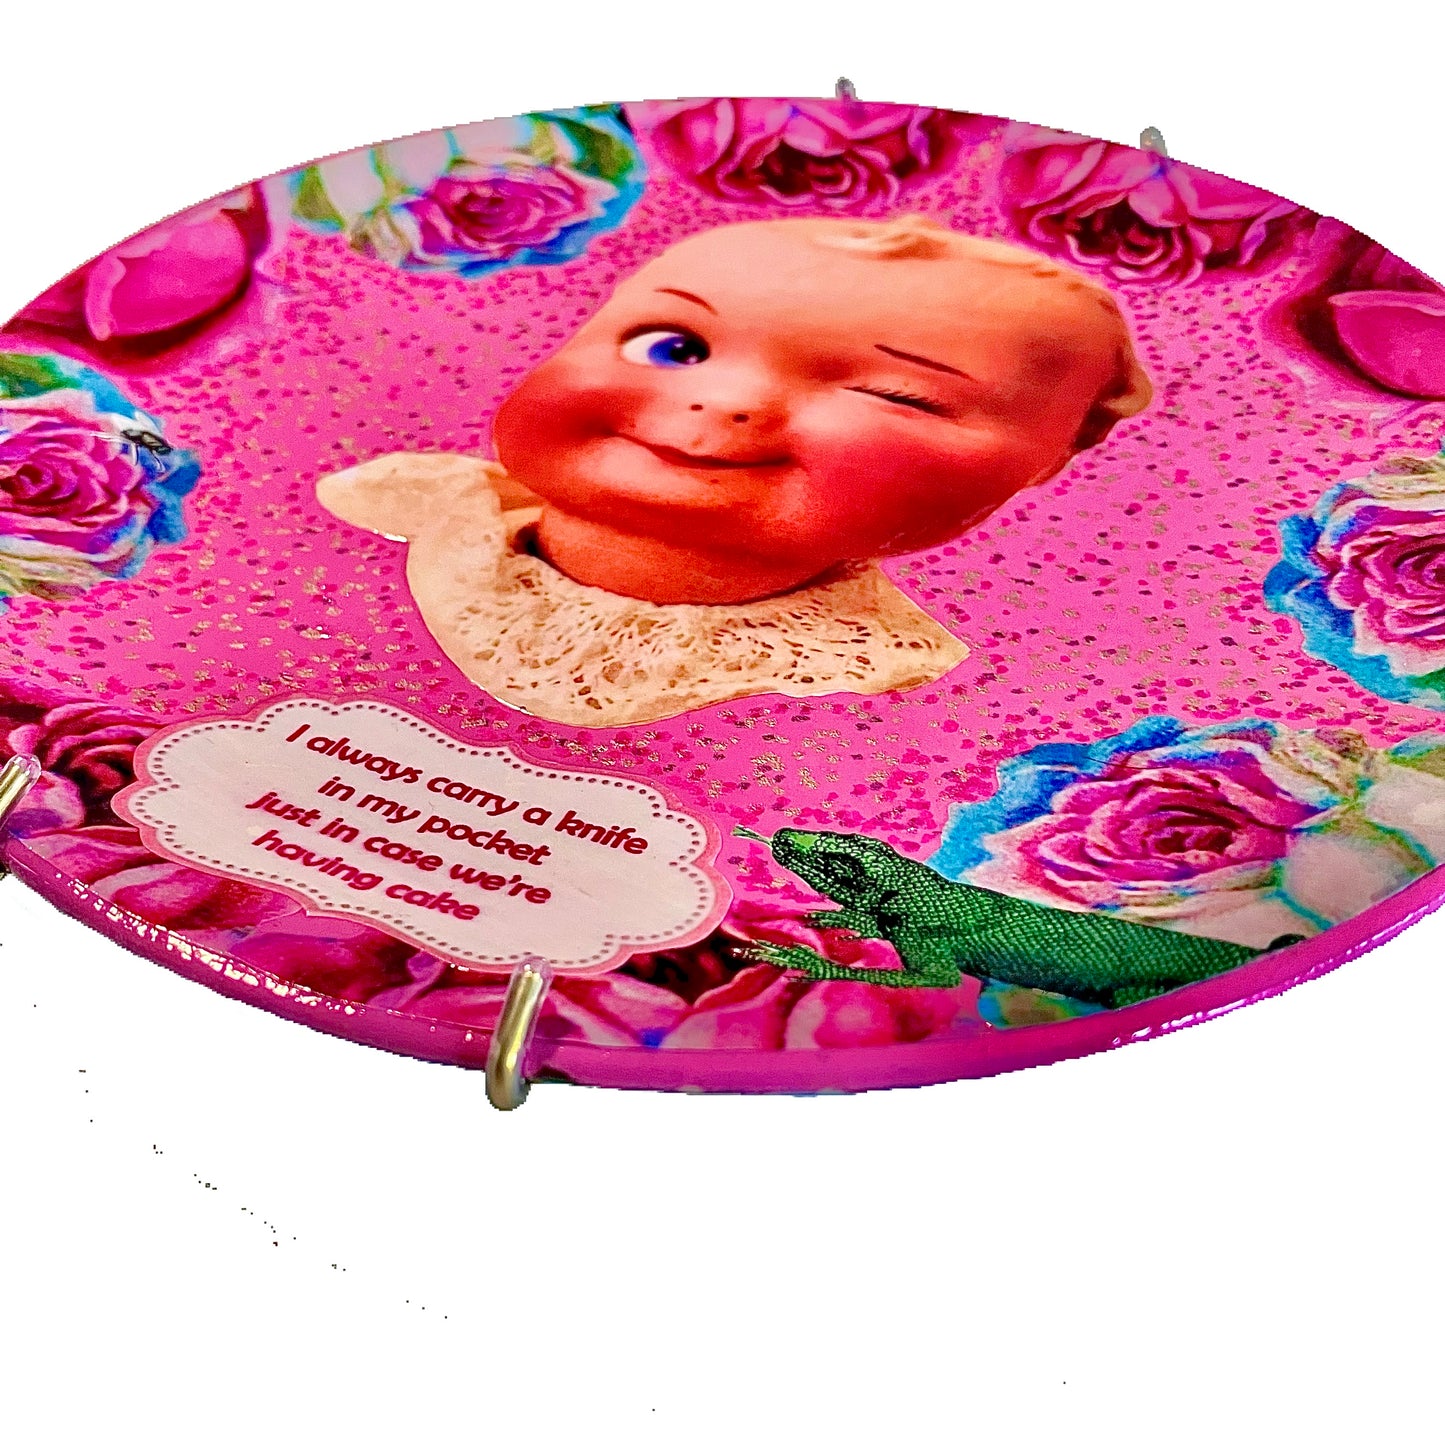 Pink Upcycled Wall Plate “I Always Carry A Knife In My Pocket Just In Case We’re Having Cake” - by House of Frisson